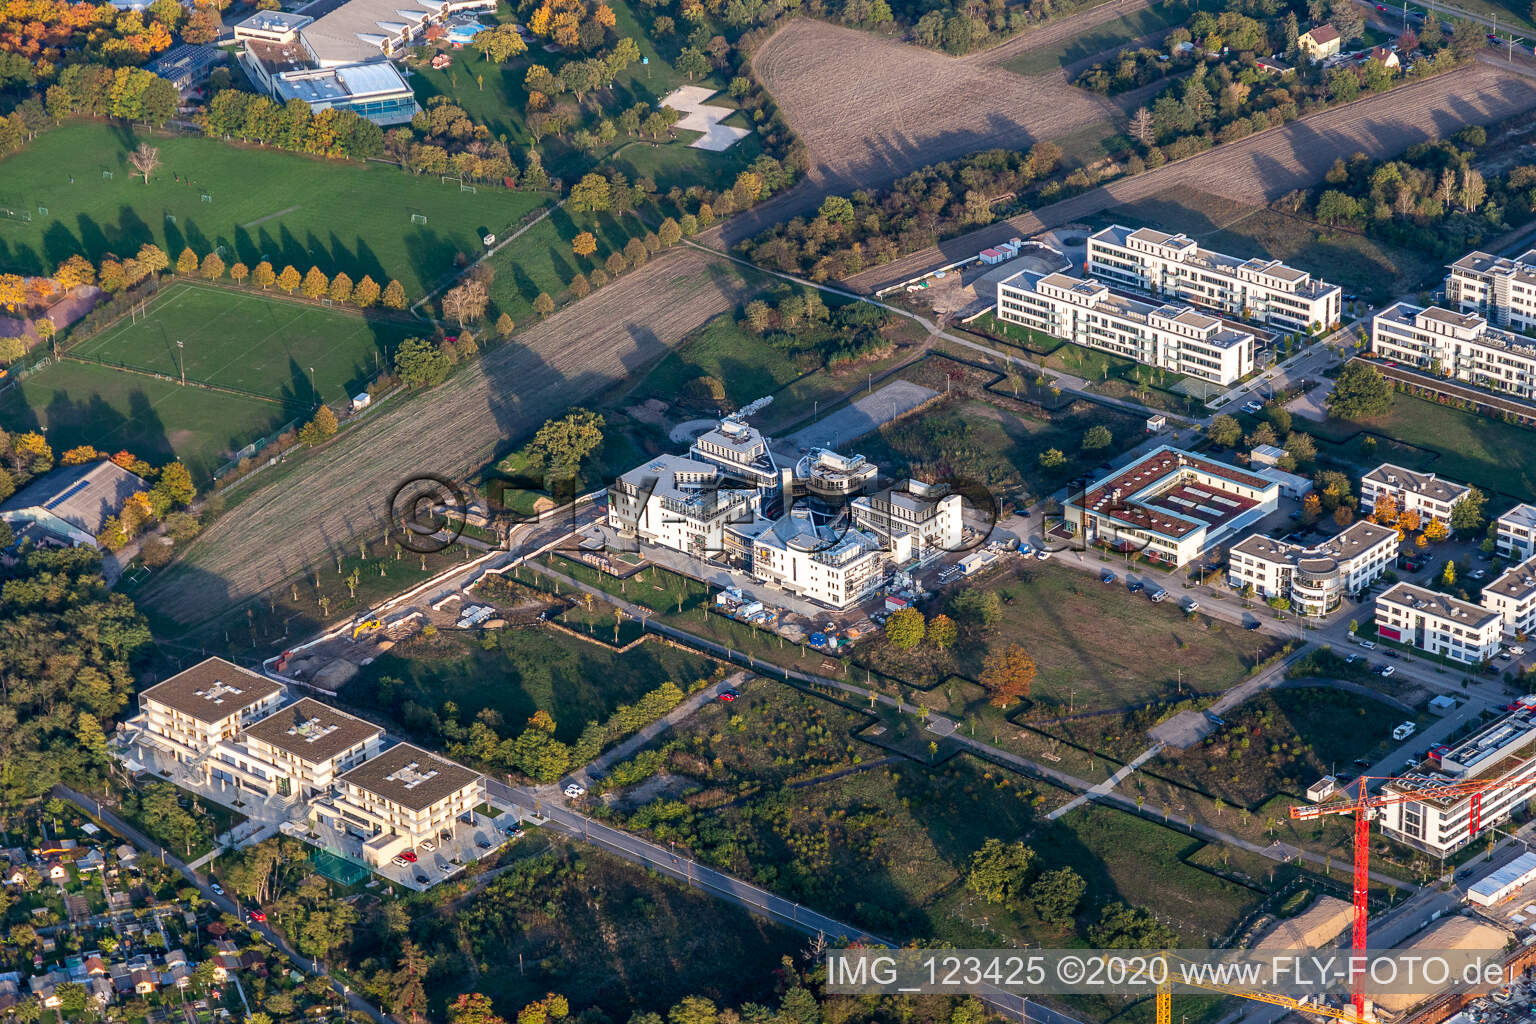 LTC - Linder Technology Campus with Weum GmbH, Systec&Services and Systec&Solutions on Wilhelm-Schickard-Straße in the Technology Park Karlsruhe in the district Rintheim in Karlsruhe in the state Baden-Wuerttemberg, Germany